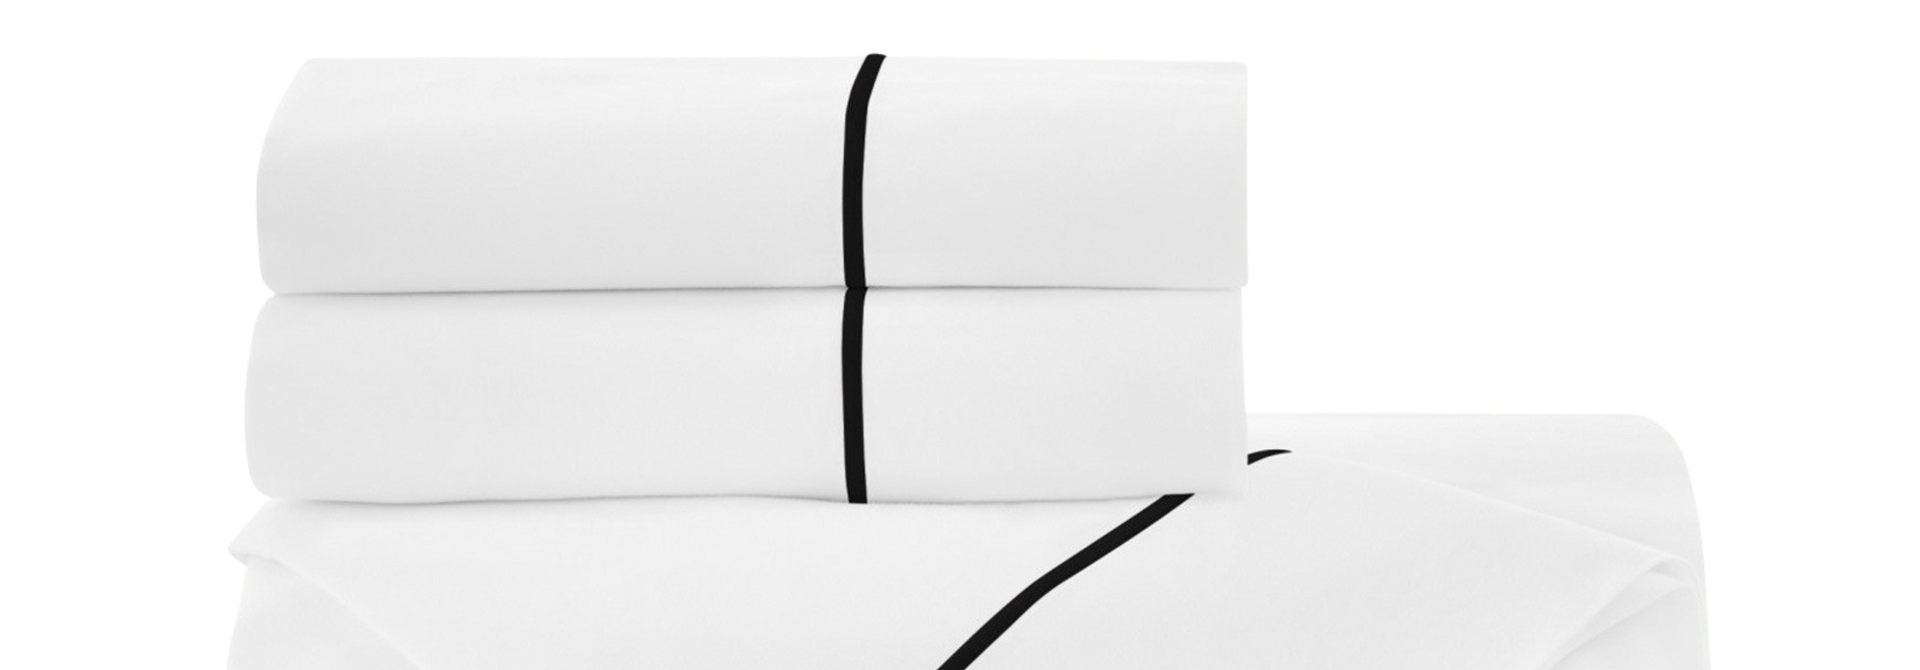 Boutique | The Peacock Alley Percale Sheeting Collection